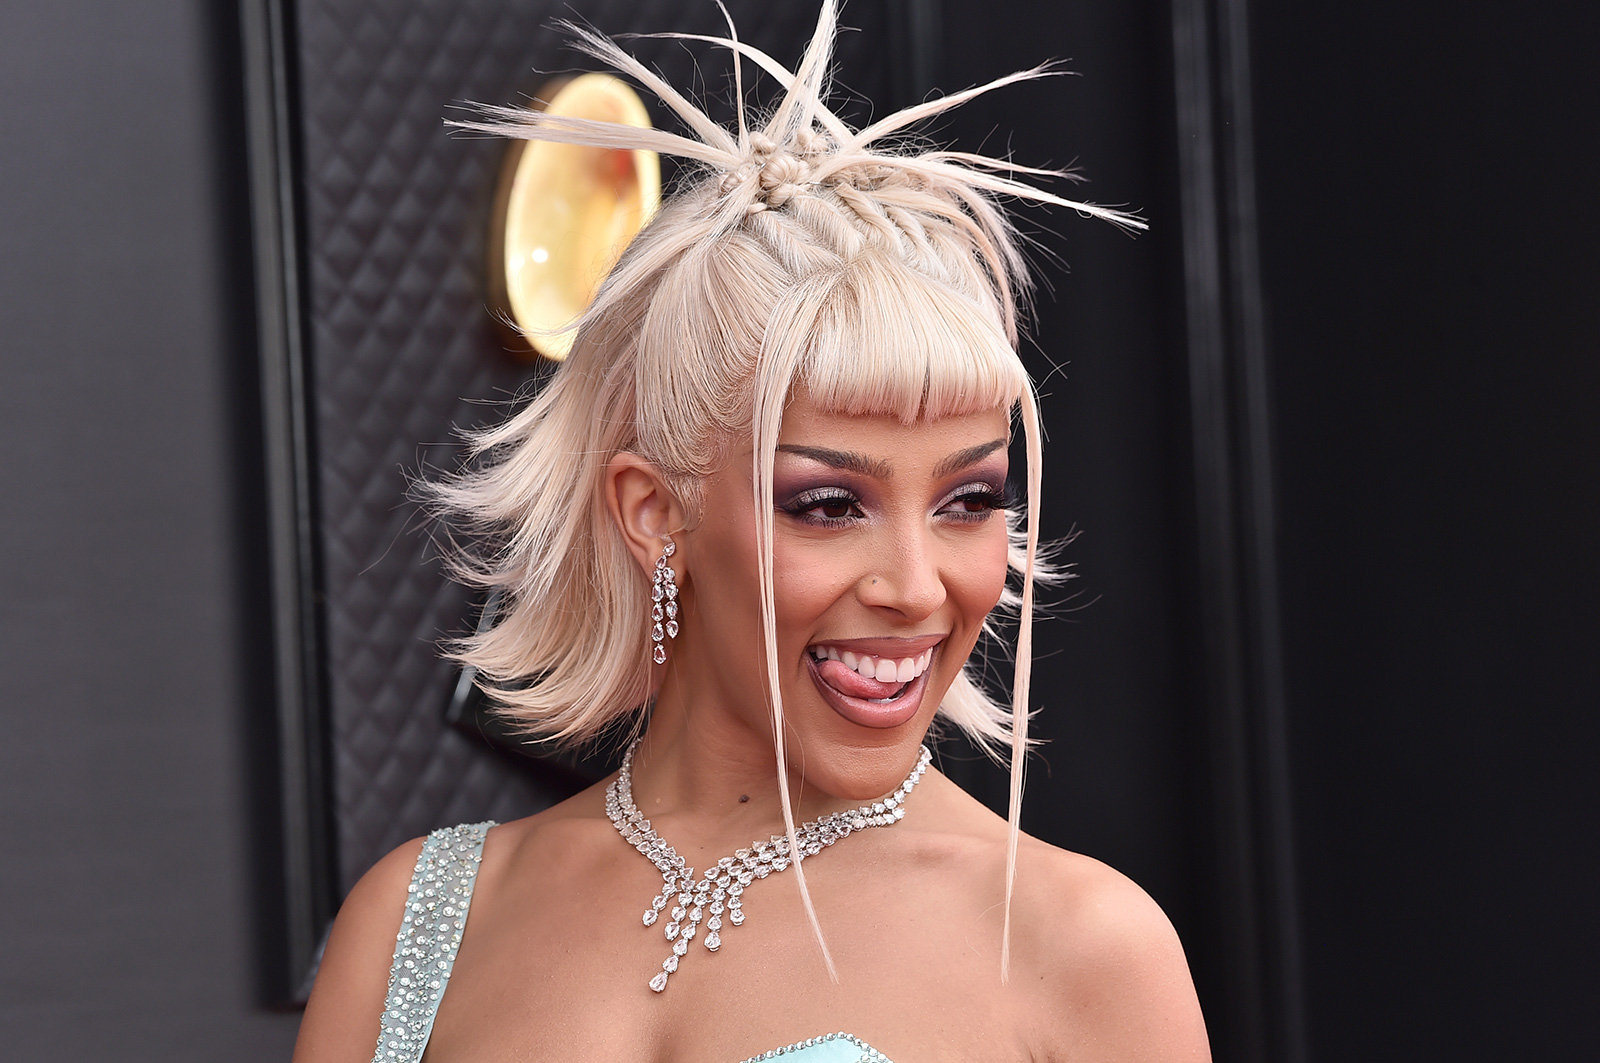 Doja Cat stuns at Grammys red carpet in dreamy Versace gown - CNN Style